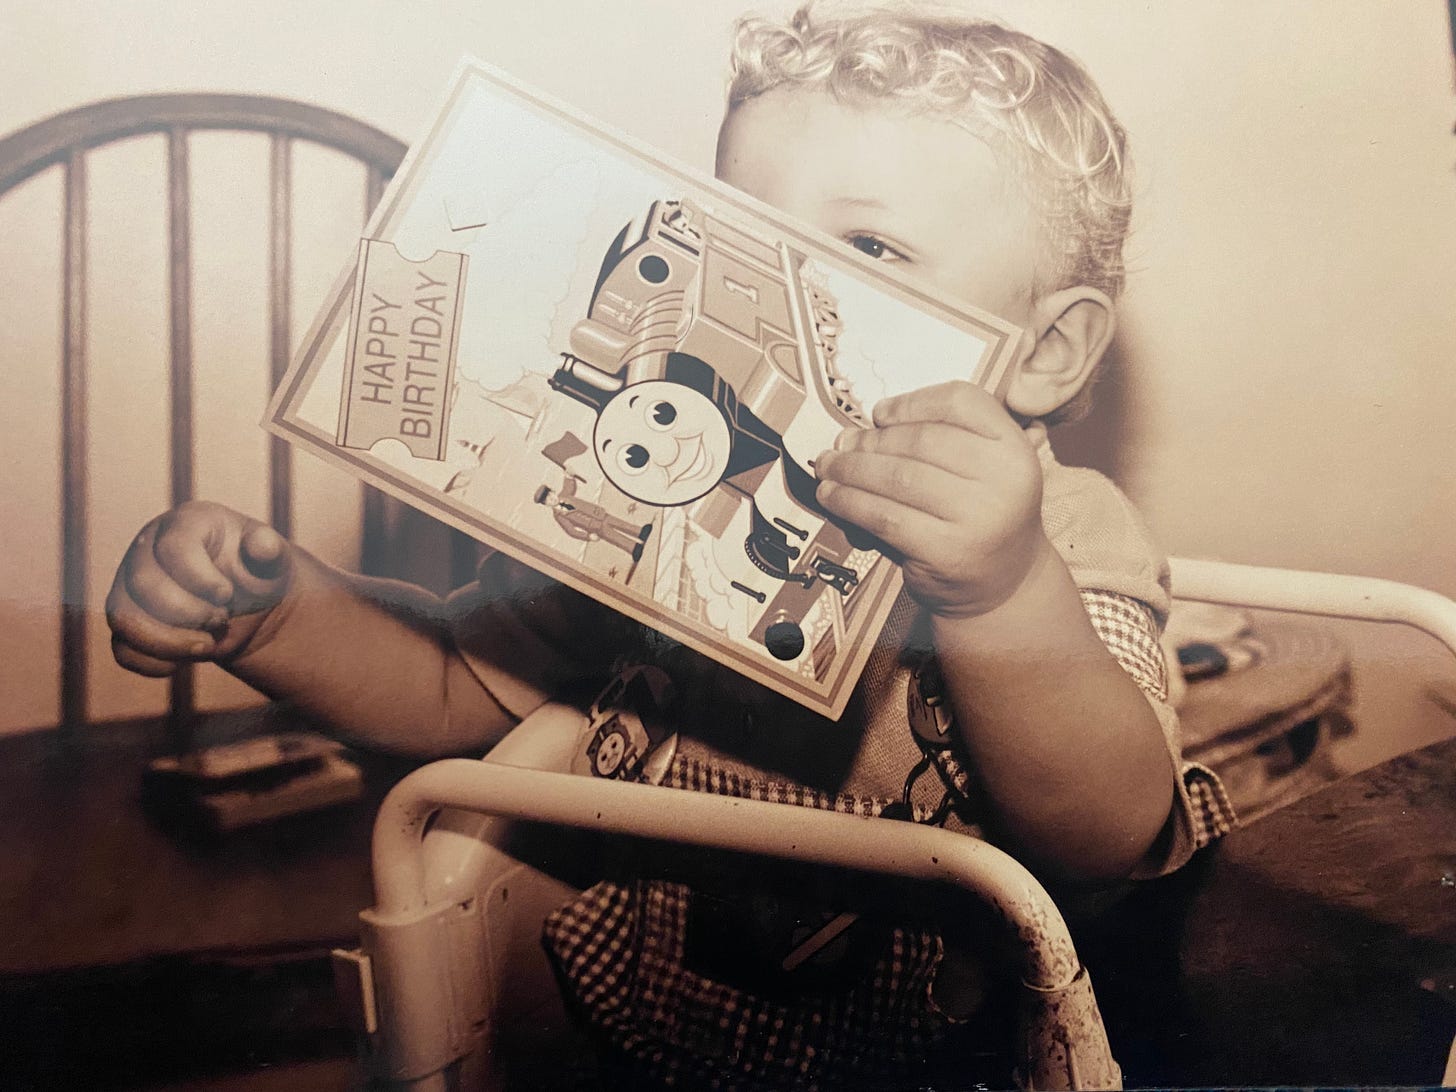 A blond curl-haired baby holds a Thomas The Tank 1-year birthday card covering his face and one eye.